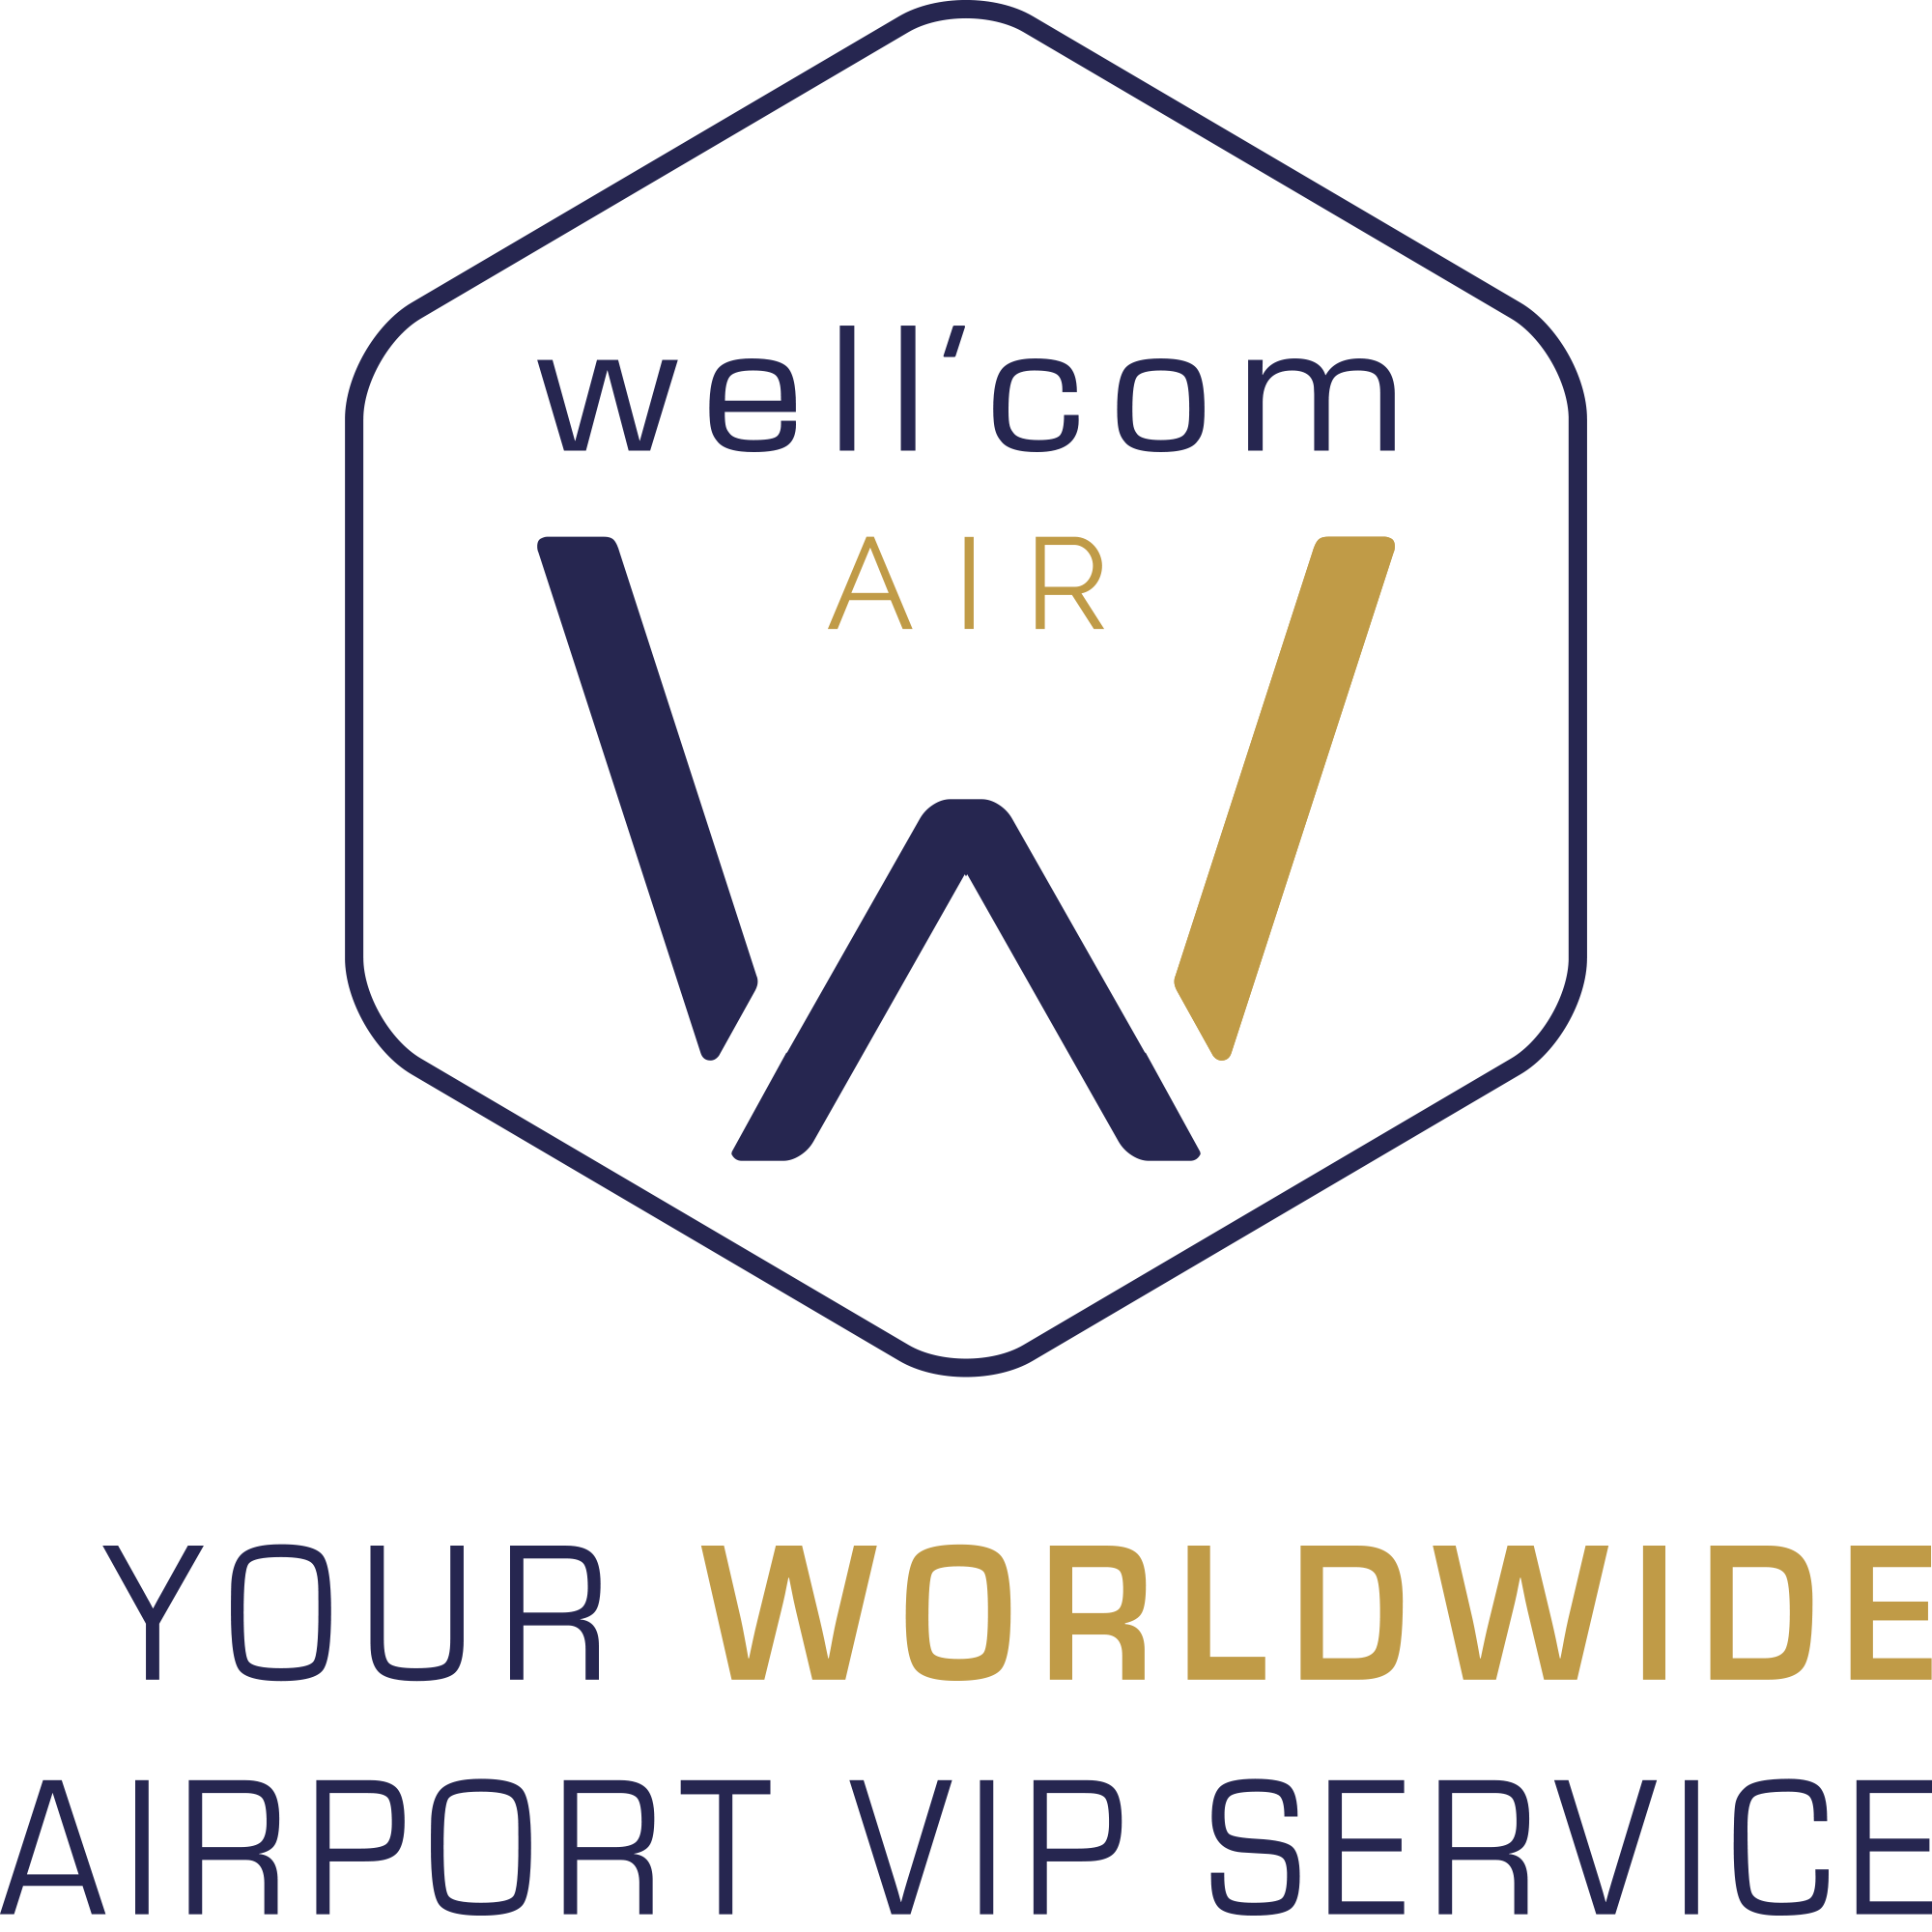 WELL'COM AIR – Your Worldwide Airport VIP Service